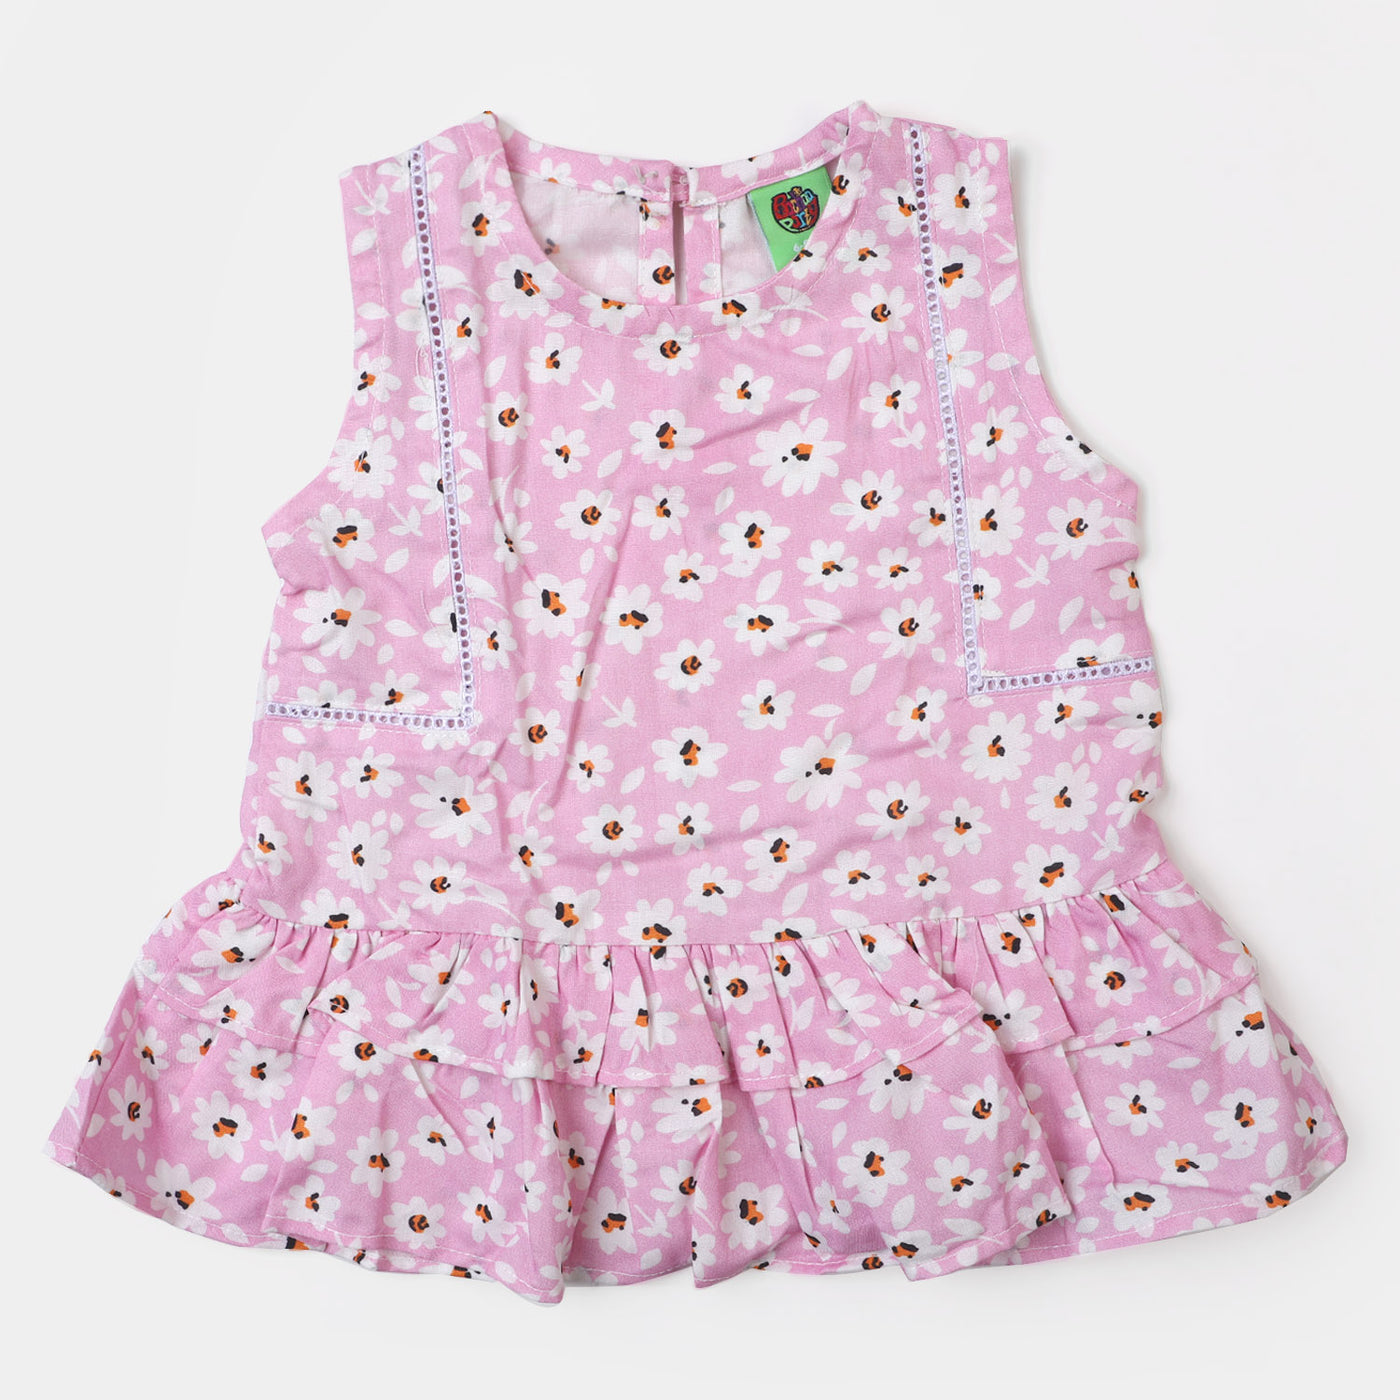 Infant Girls Casual Top Flowers - Pink